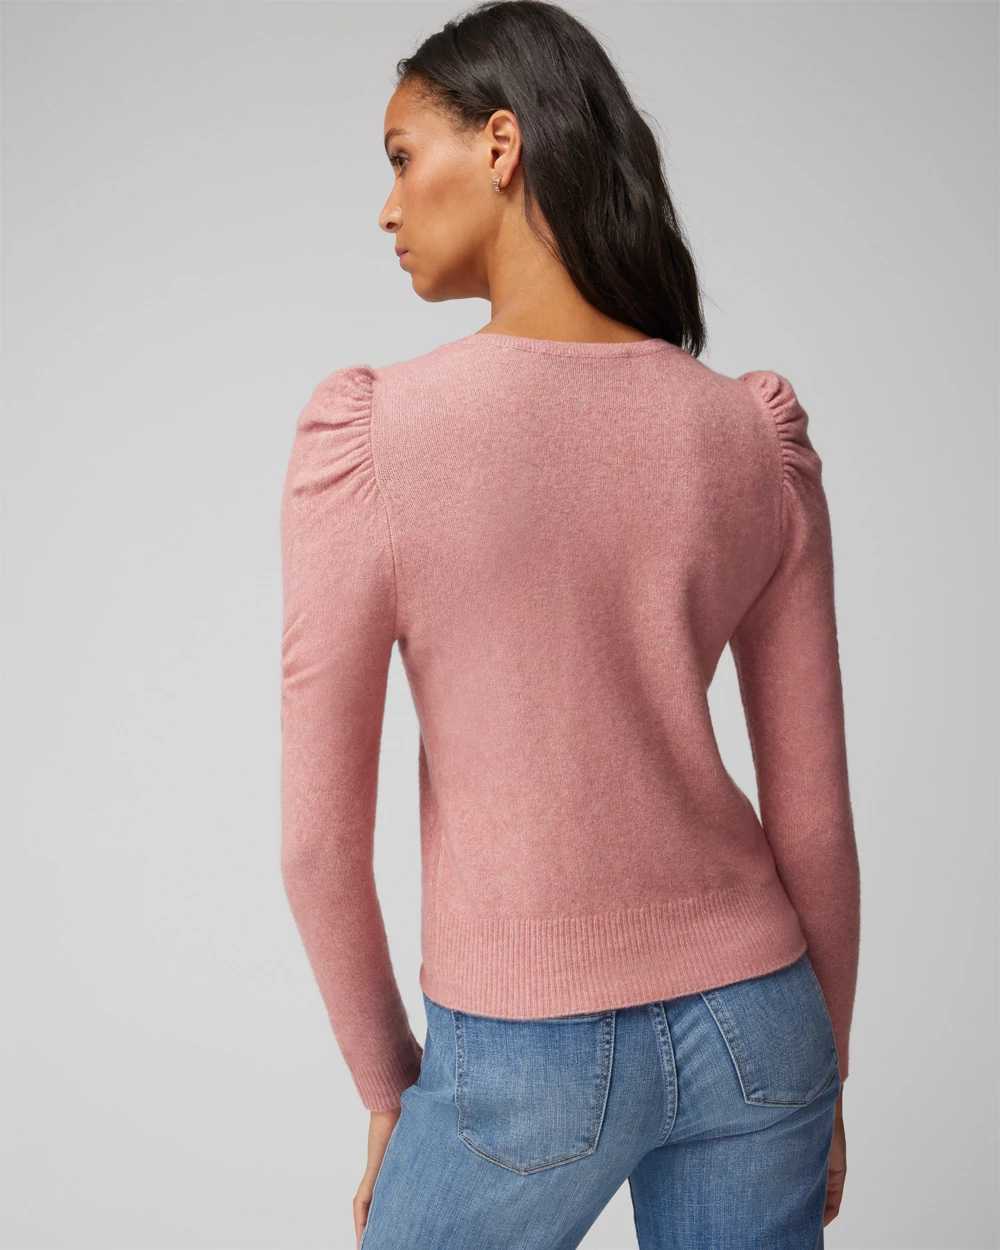 Puff Sleeve V-Neck Pull Over click to view larger image.